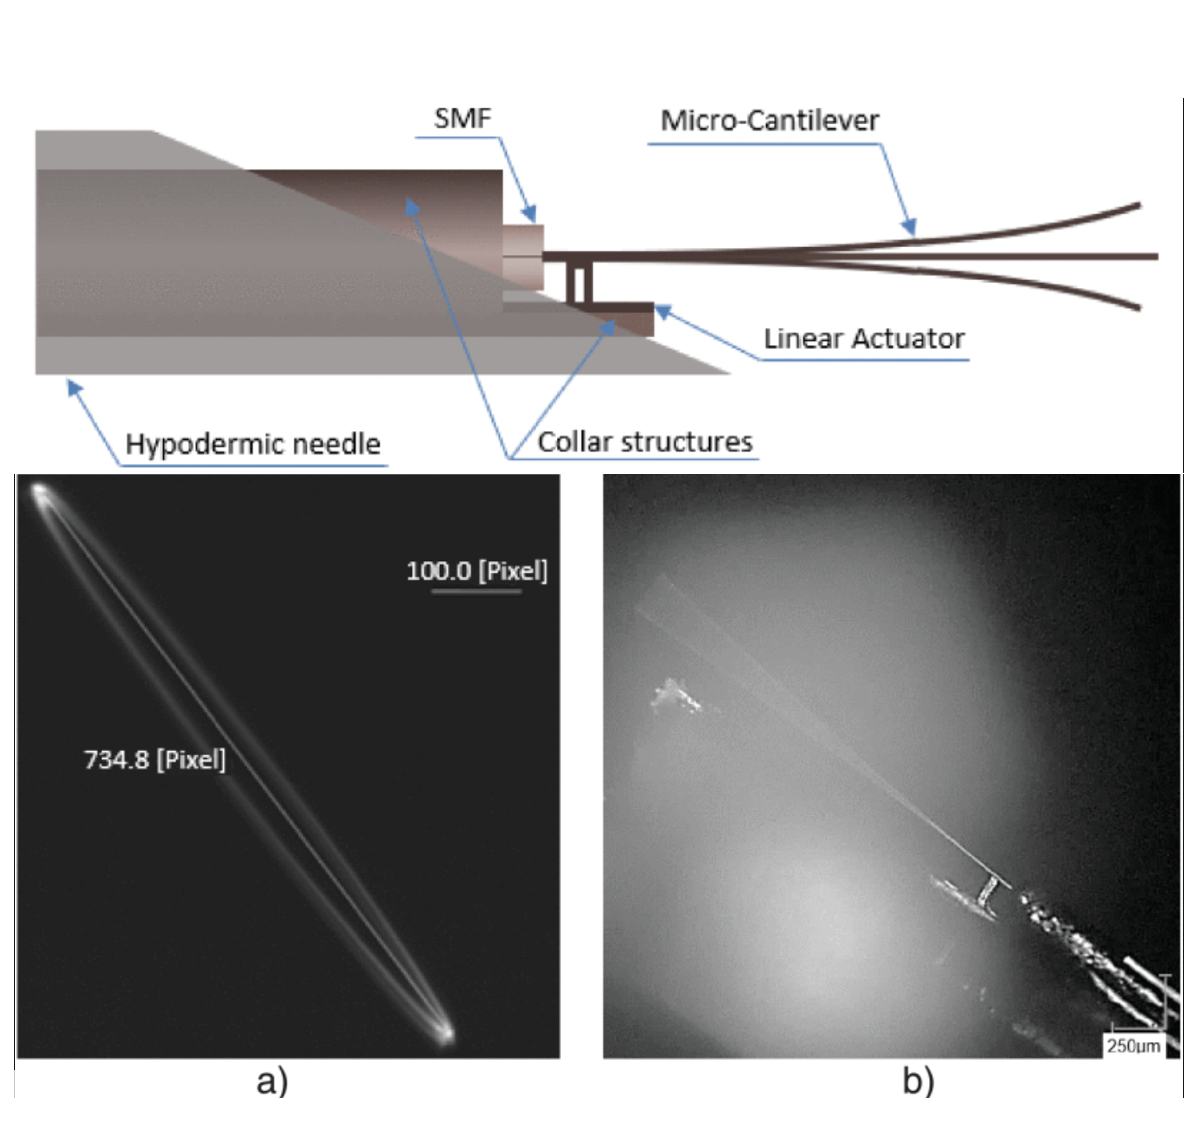 An Electro-Thermally Actuated Micro-Cantilever-Based Fiber Optic Scanner